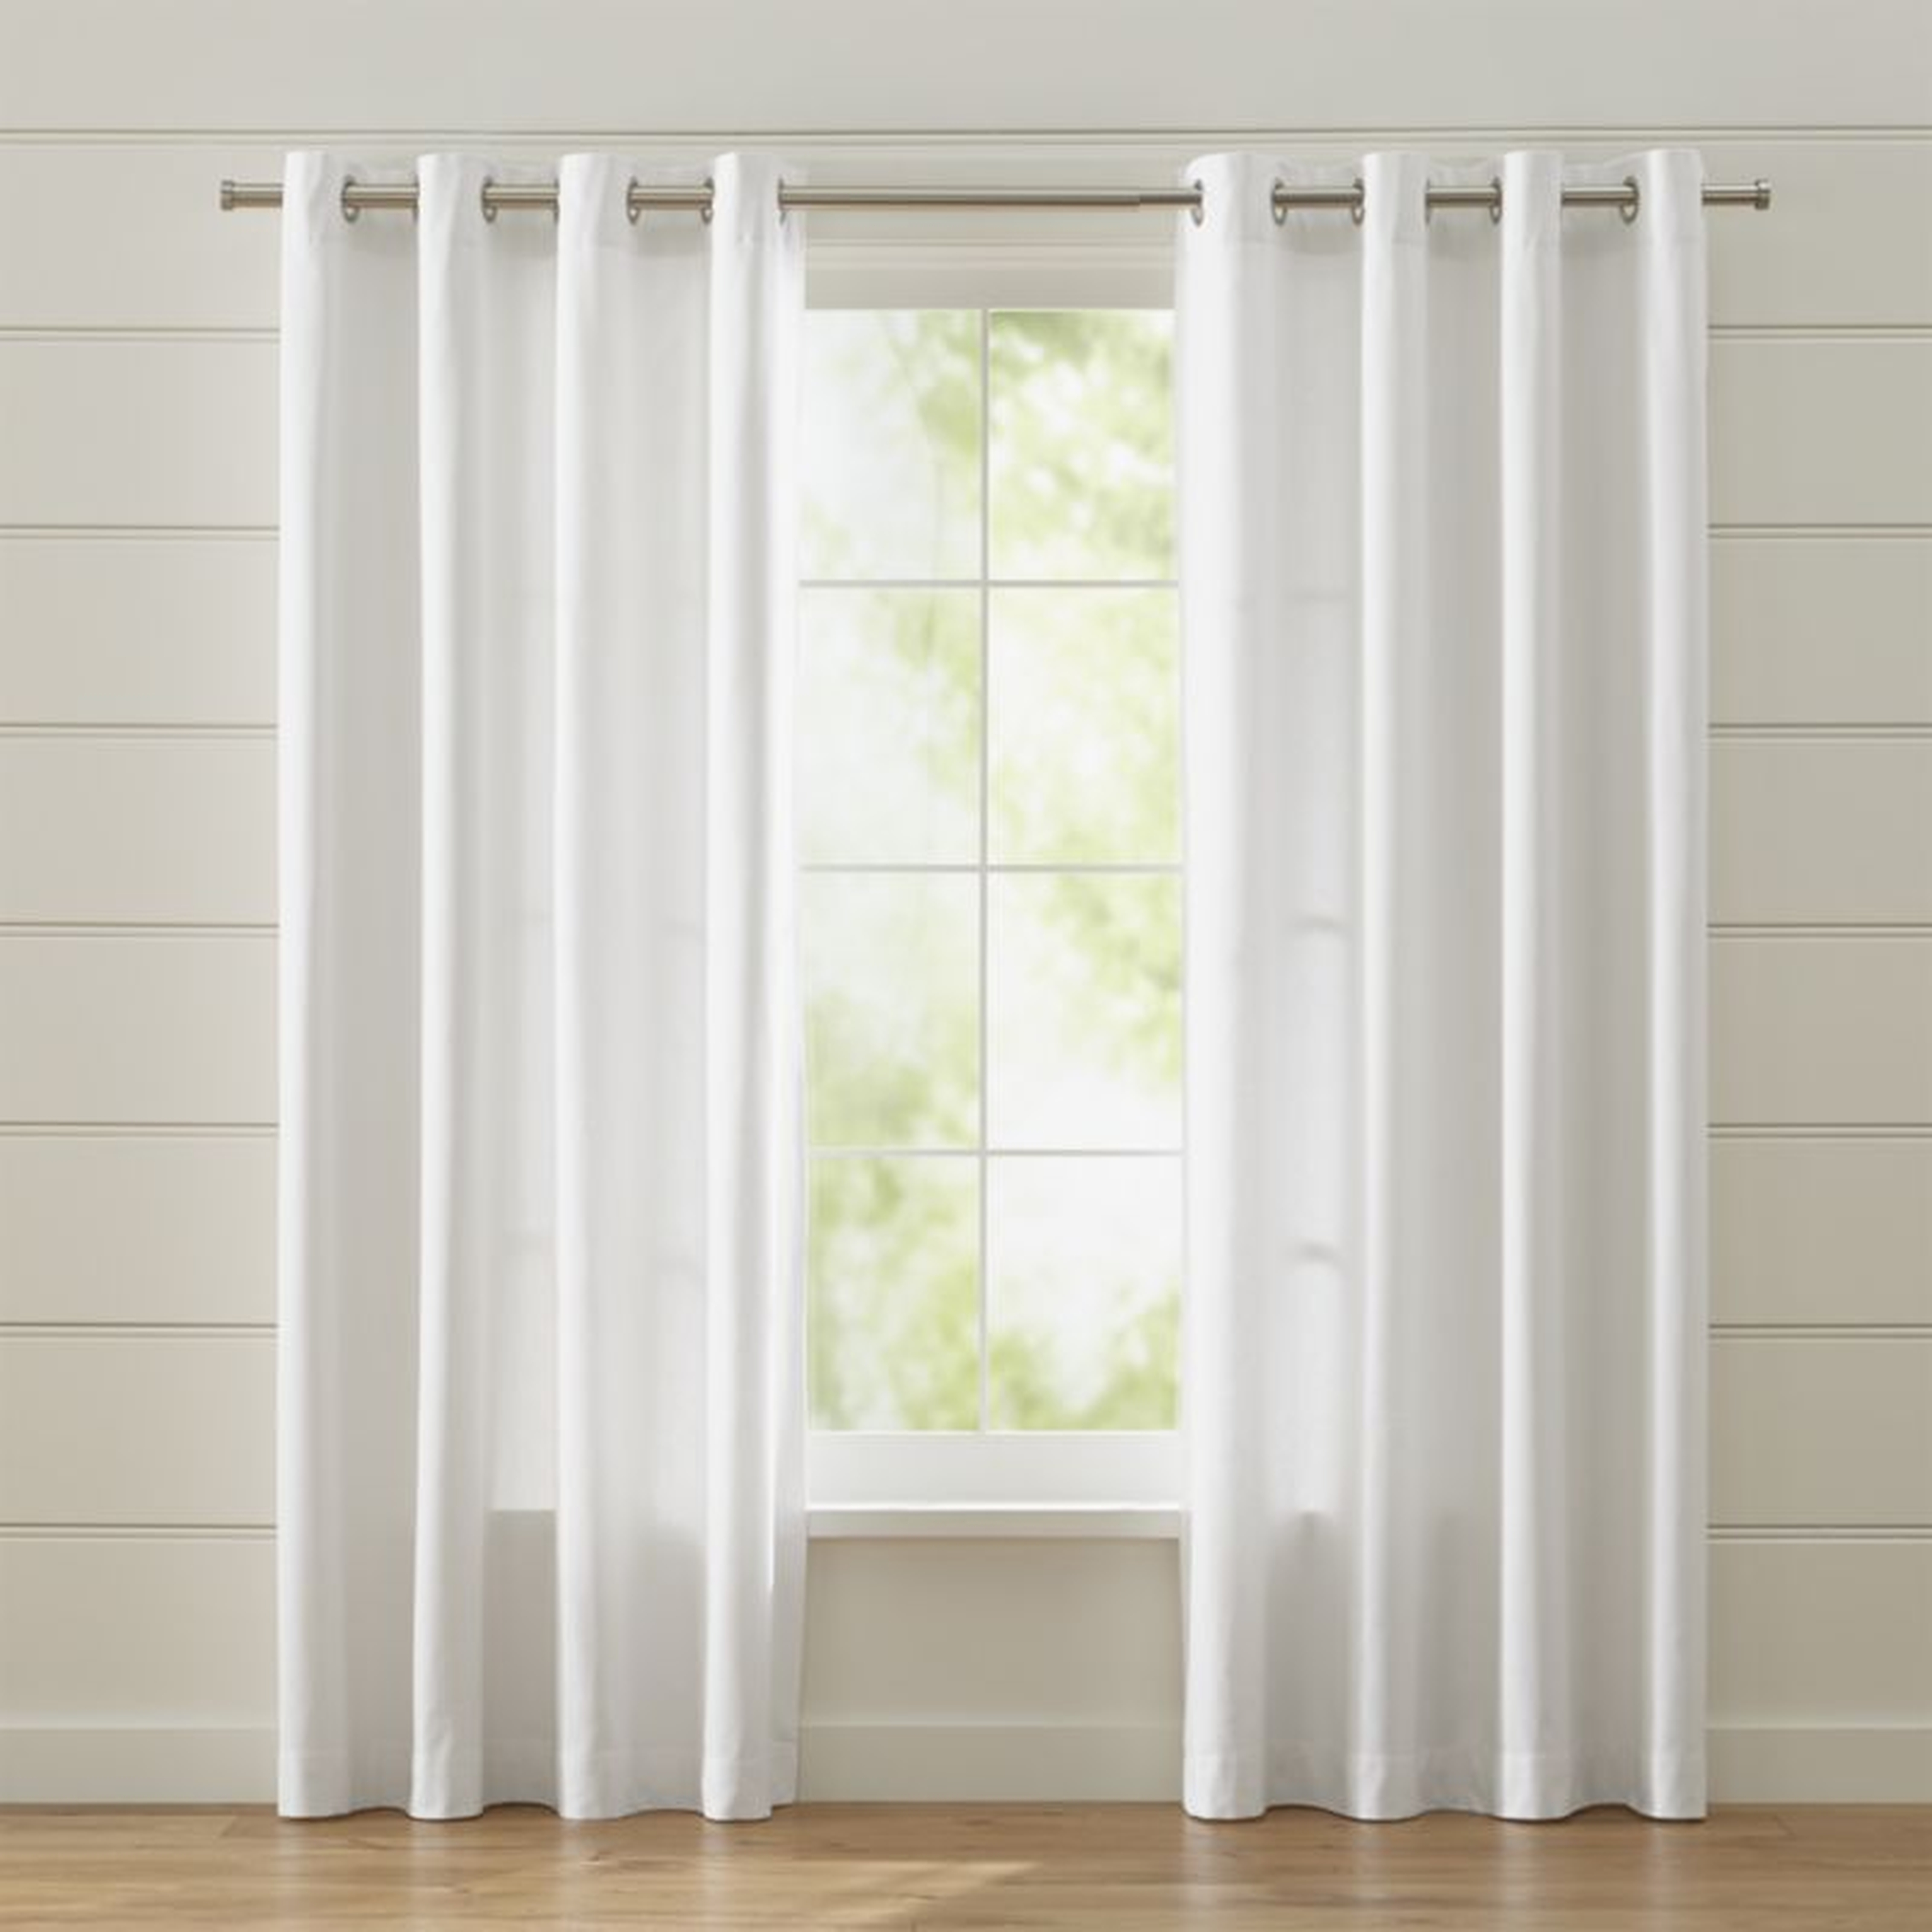 Wallace Grommet Curtain Panel, White, 52" x 84" - Crate and Barrel